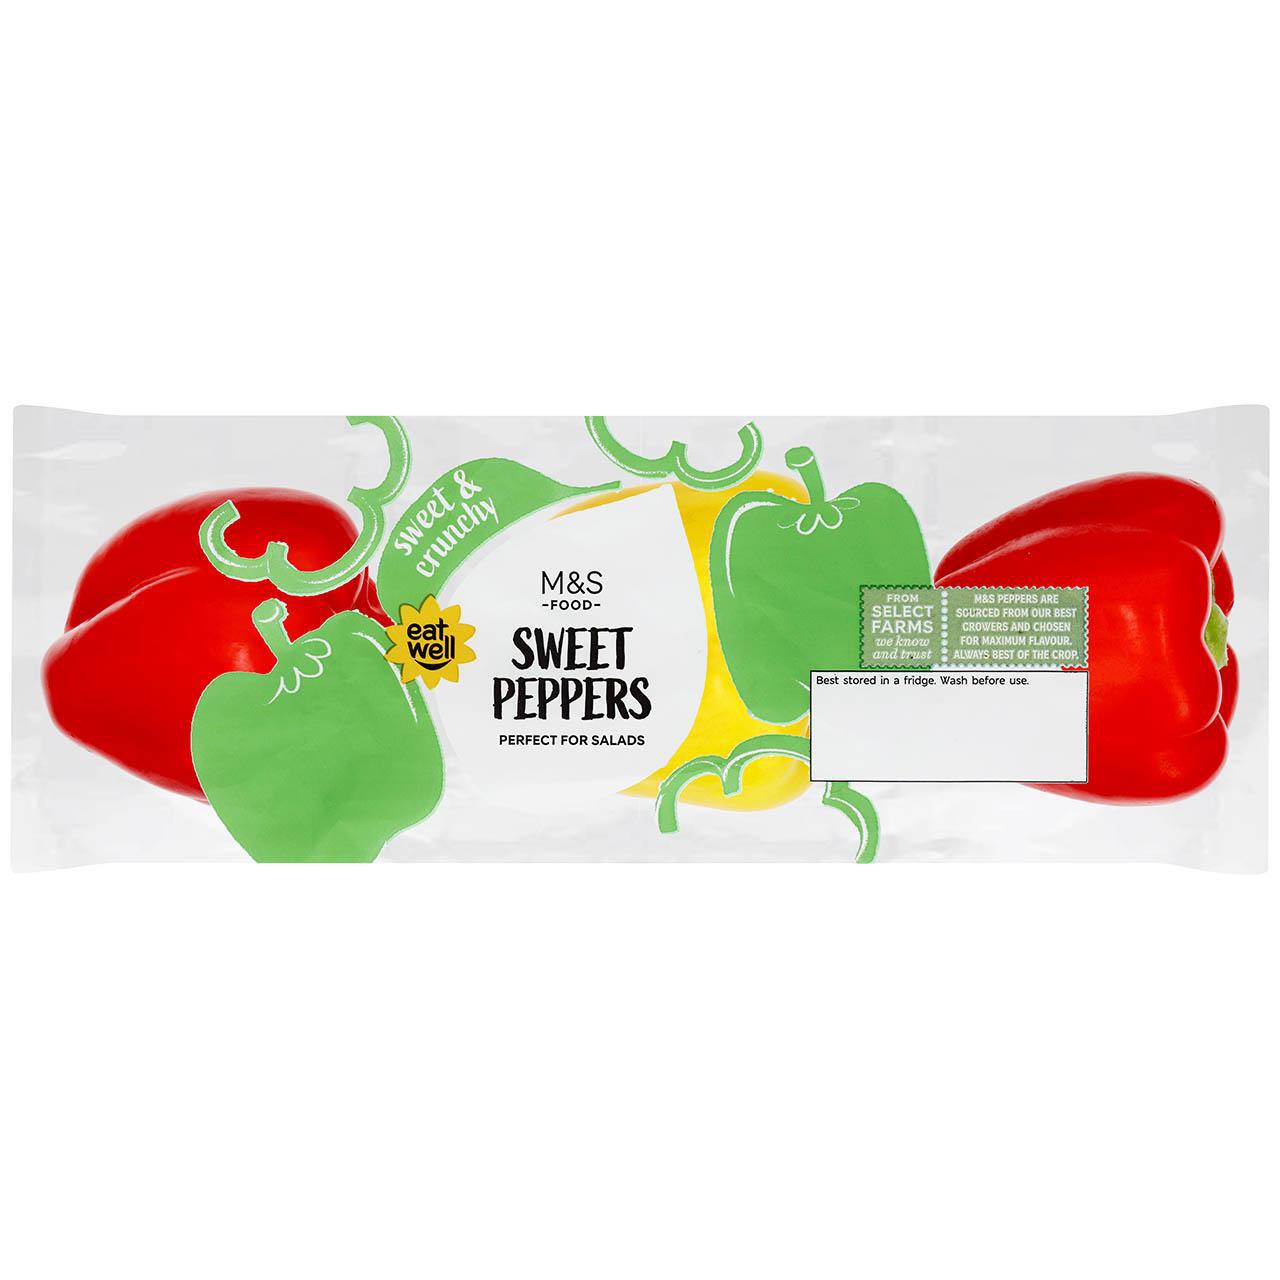 M&S Sweet Peppers 3 per pack